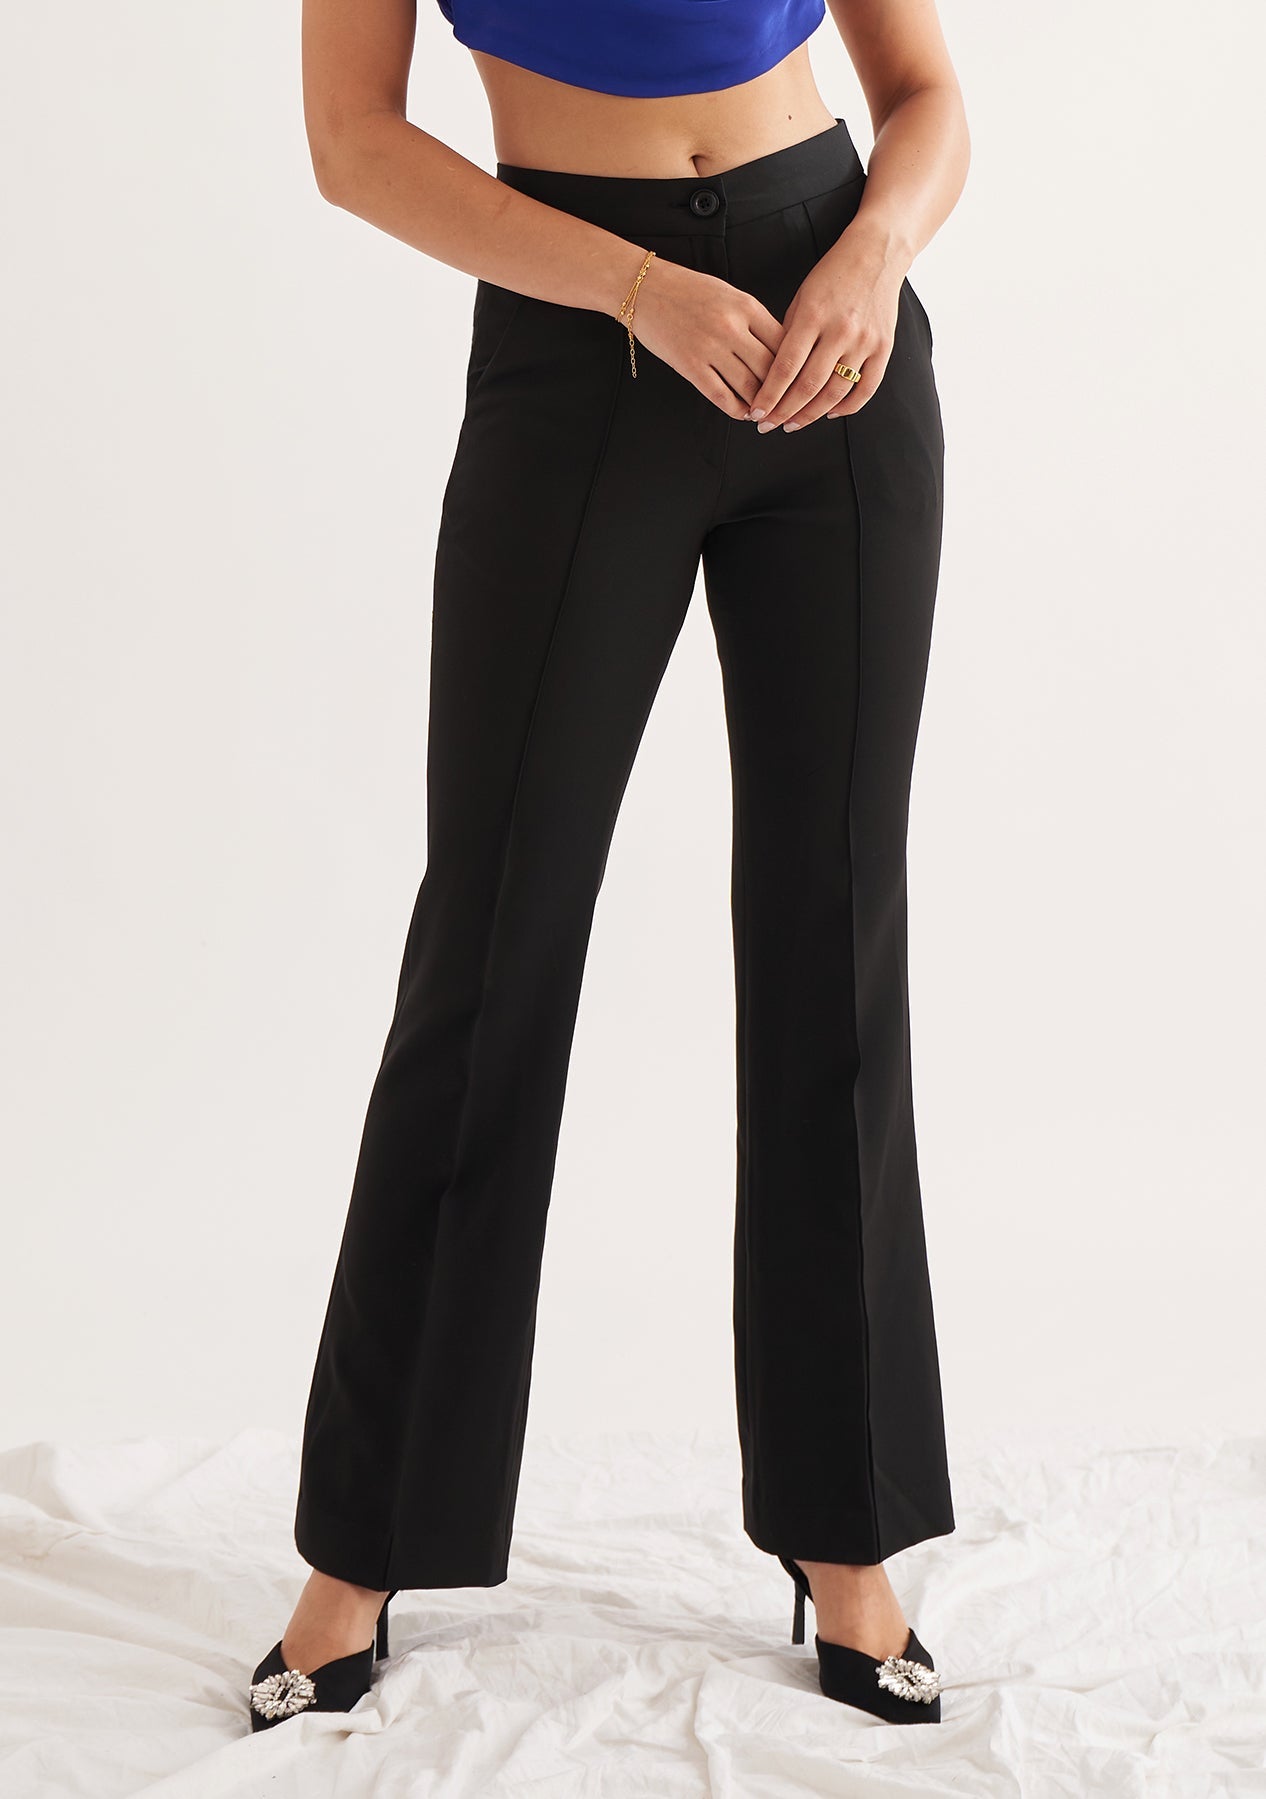 Realistic Formal Trousers for Women Stock Illustration - Illustration of  cotton, flared: 126203975